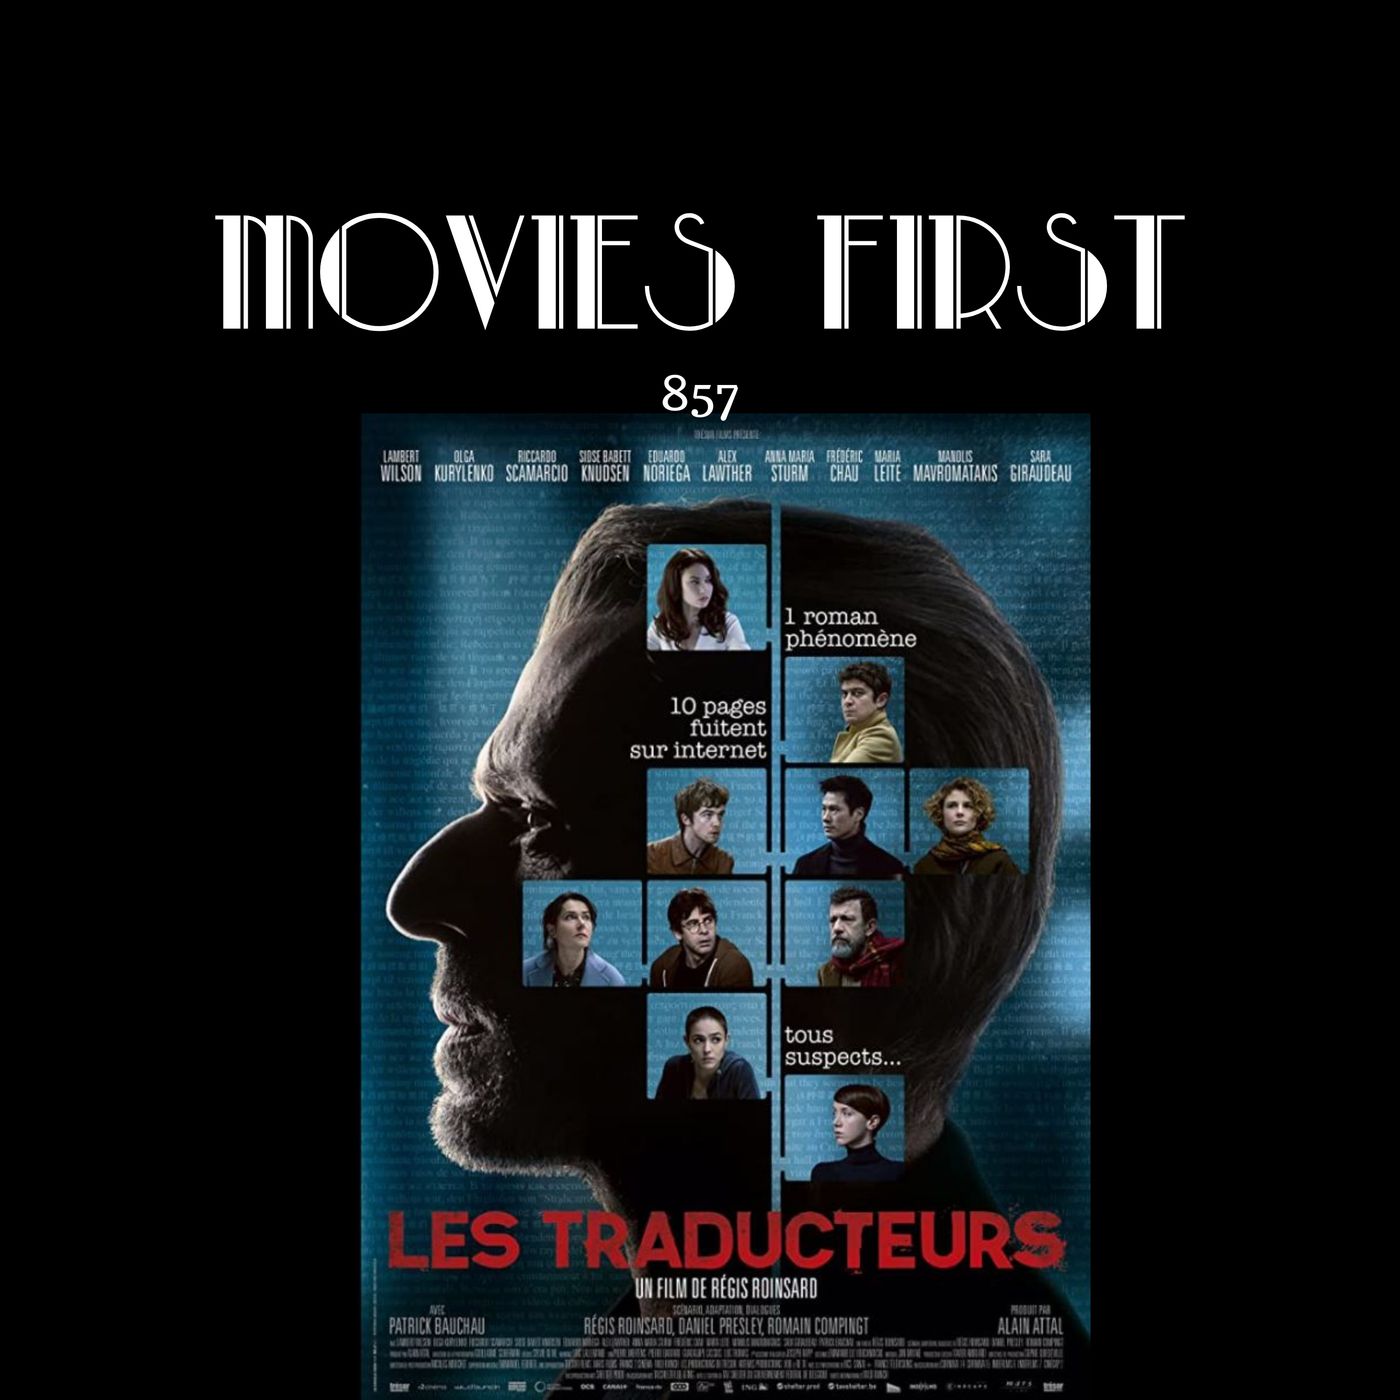 The Translators (Les traducteurs (original title)) (Mystery, Thriller) (the @MoviesFirst review)